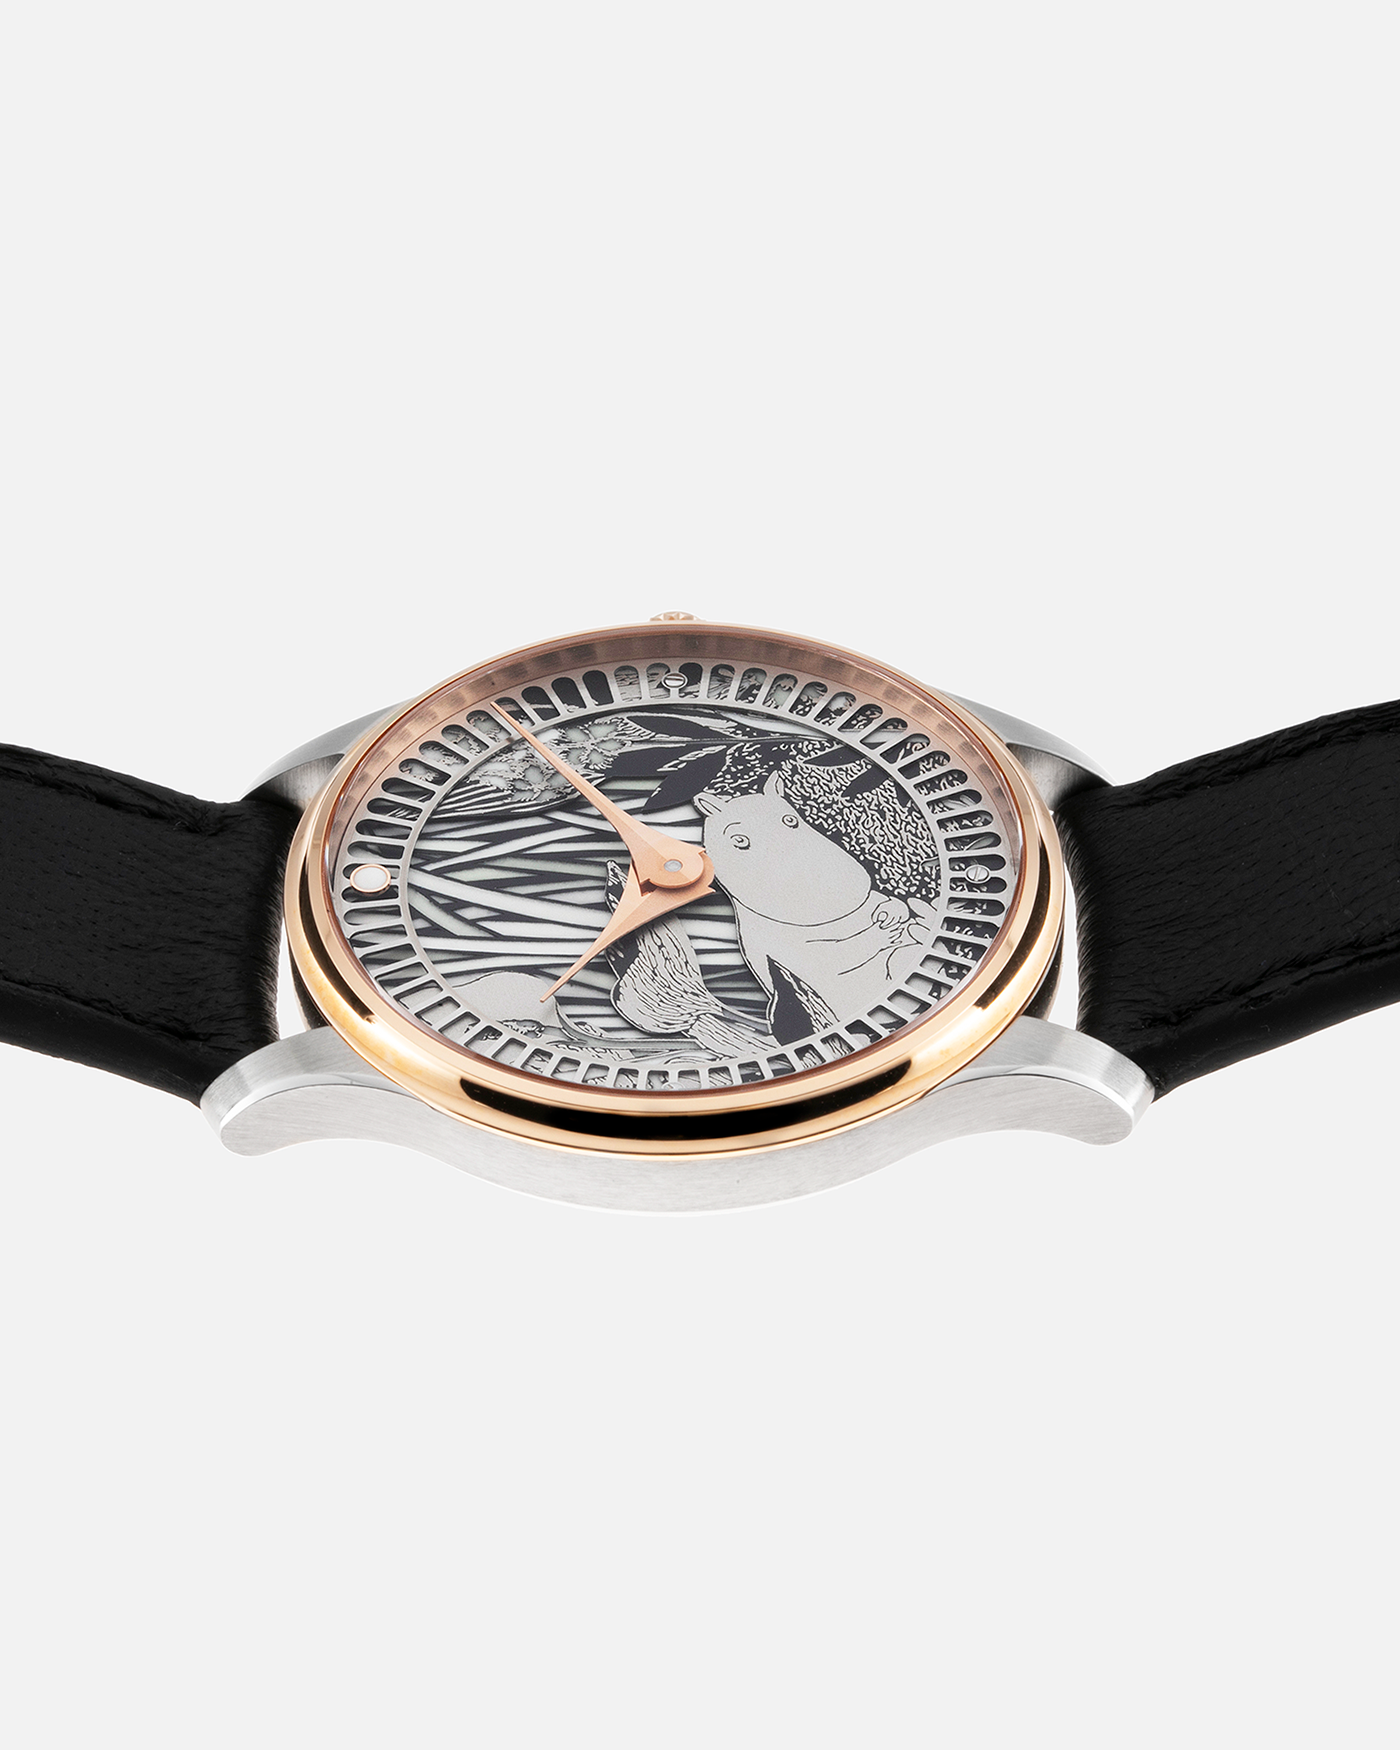 Brand: Sarpaneva S.U.F. Year: 2021 Model: Moomin For The Hour Glass Material: Stainless Steel, 18-carat Pink Gold Movement: Cal. Soprod A10, Self–Winding Case Diameter: 38.7mm Bracelet/Strap: SUF Sarpaneva Black Calf With Stainless Steel Tang Buckle